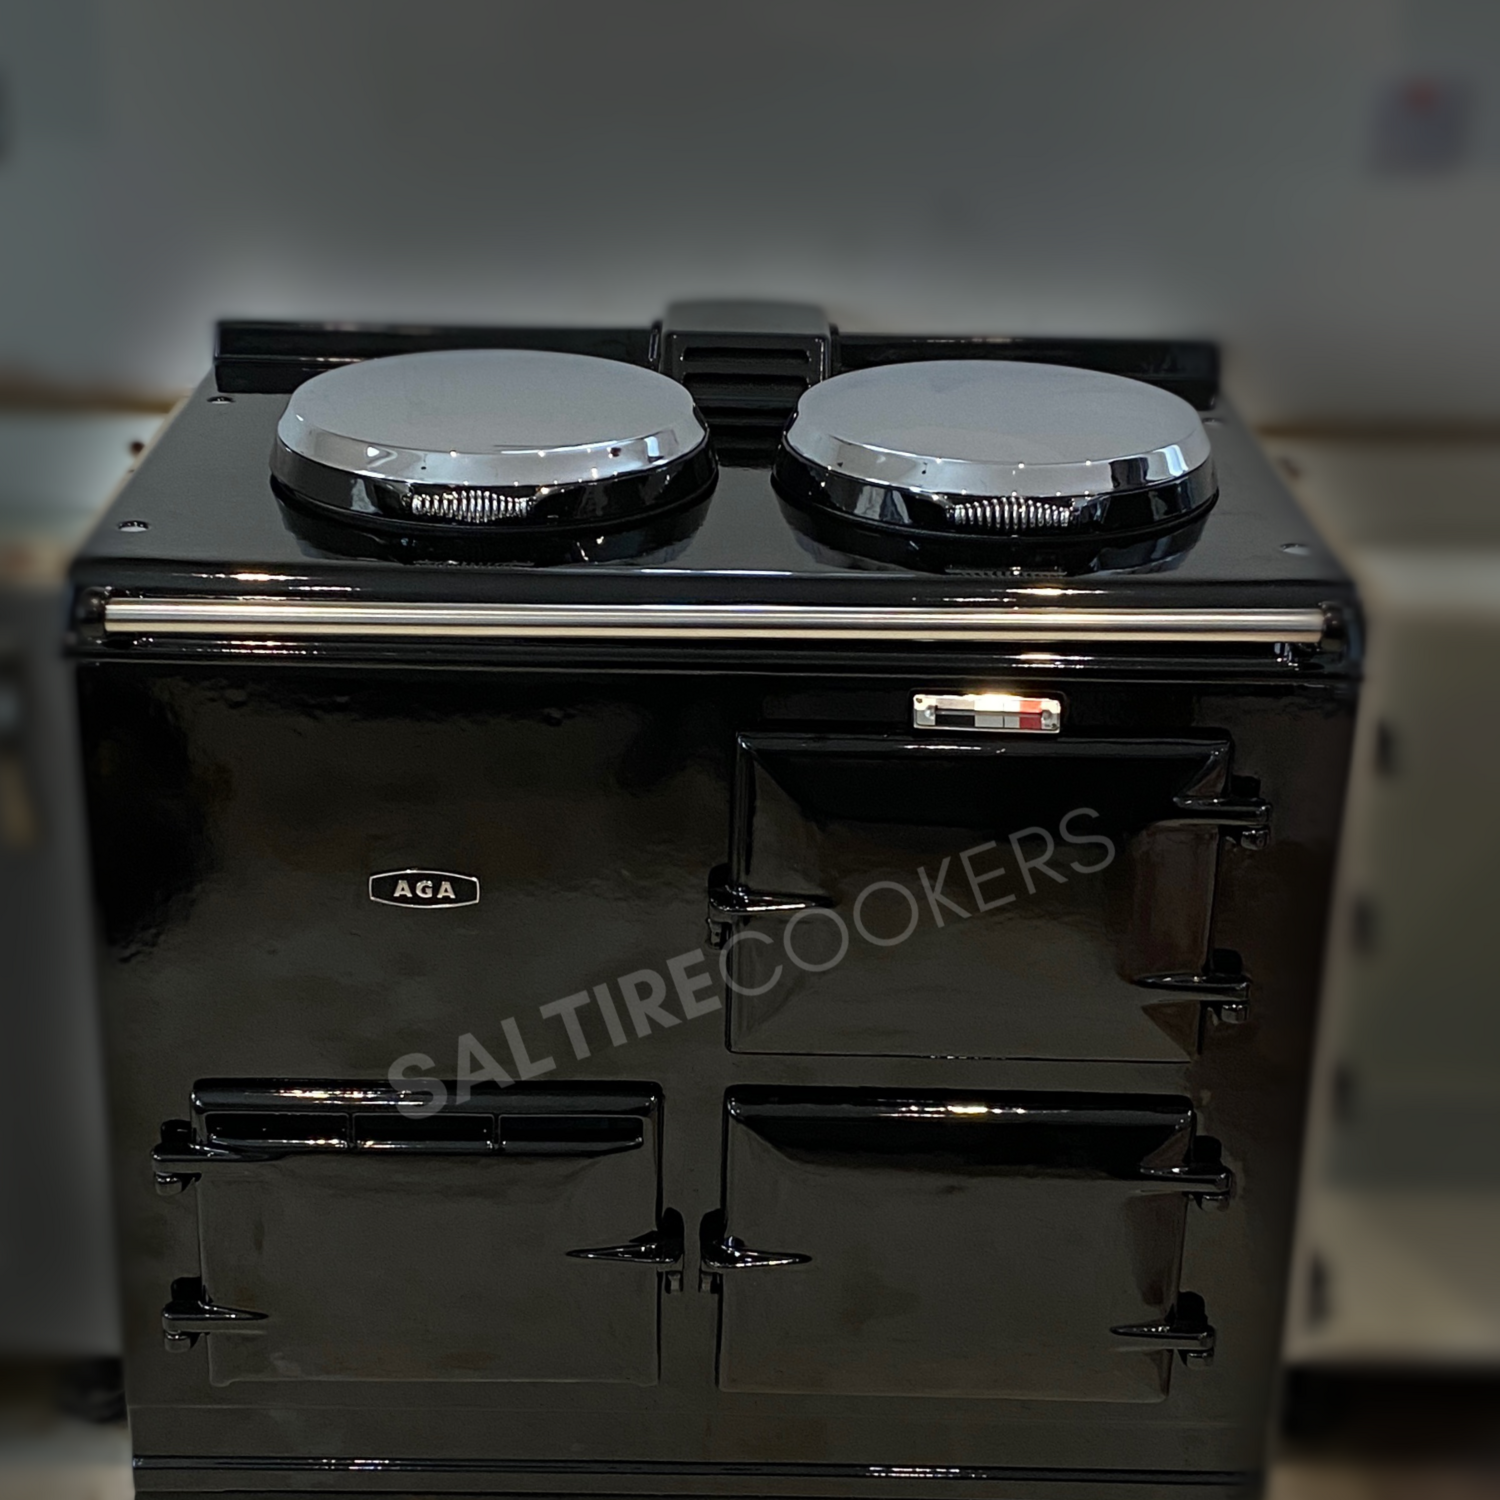 Reconditioned 2 Oven eControl Aga Cooker (Black)